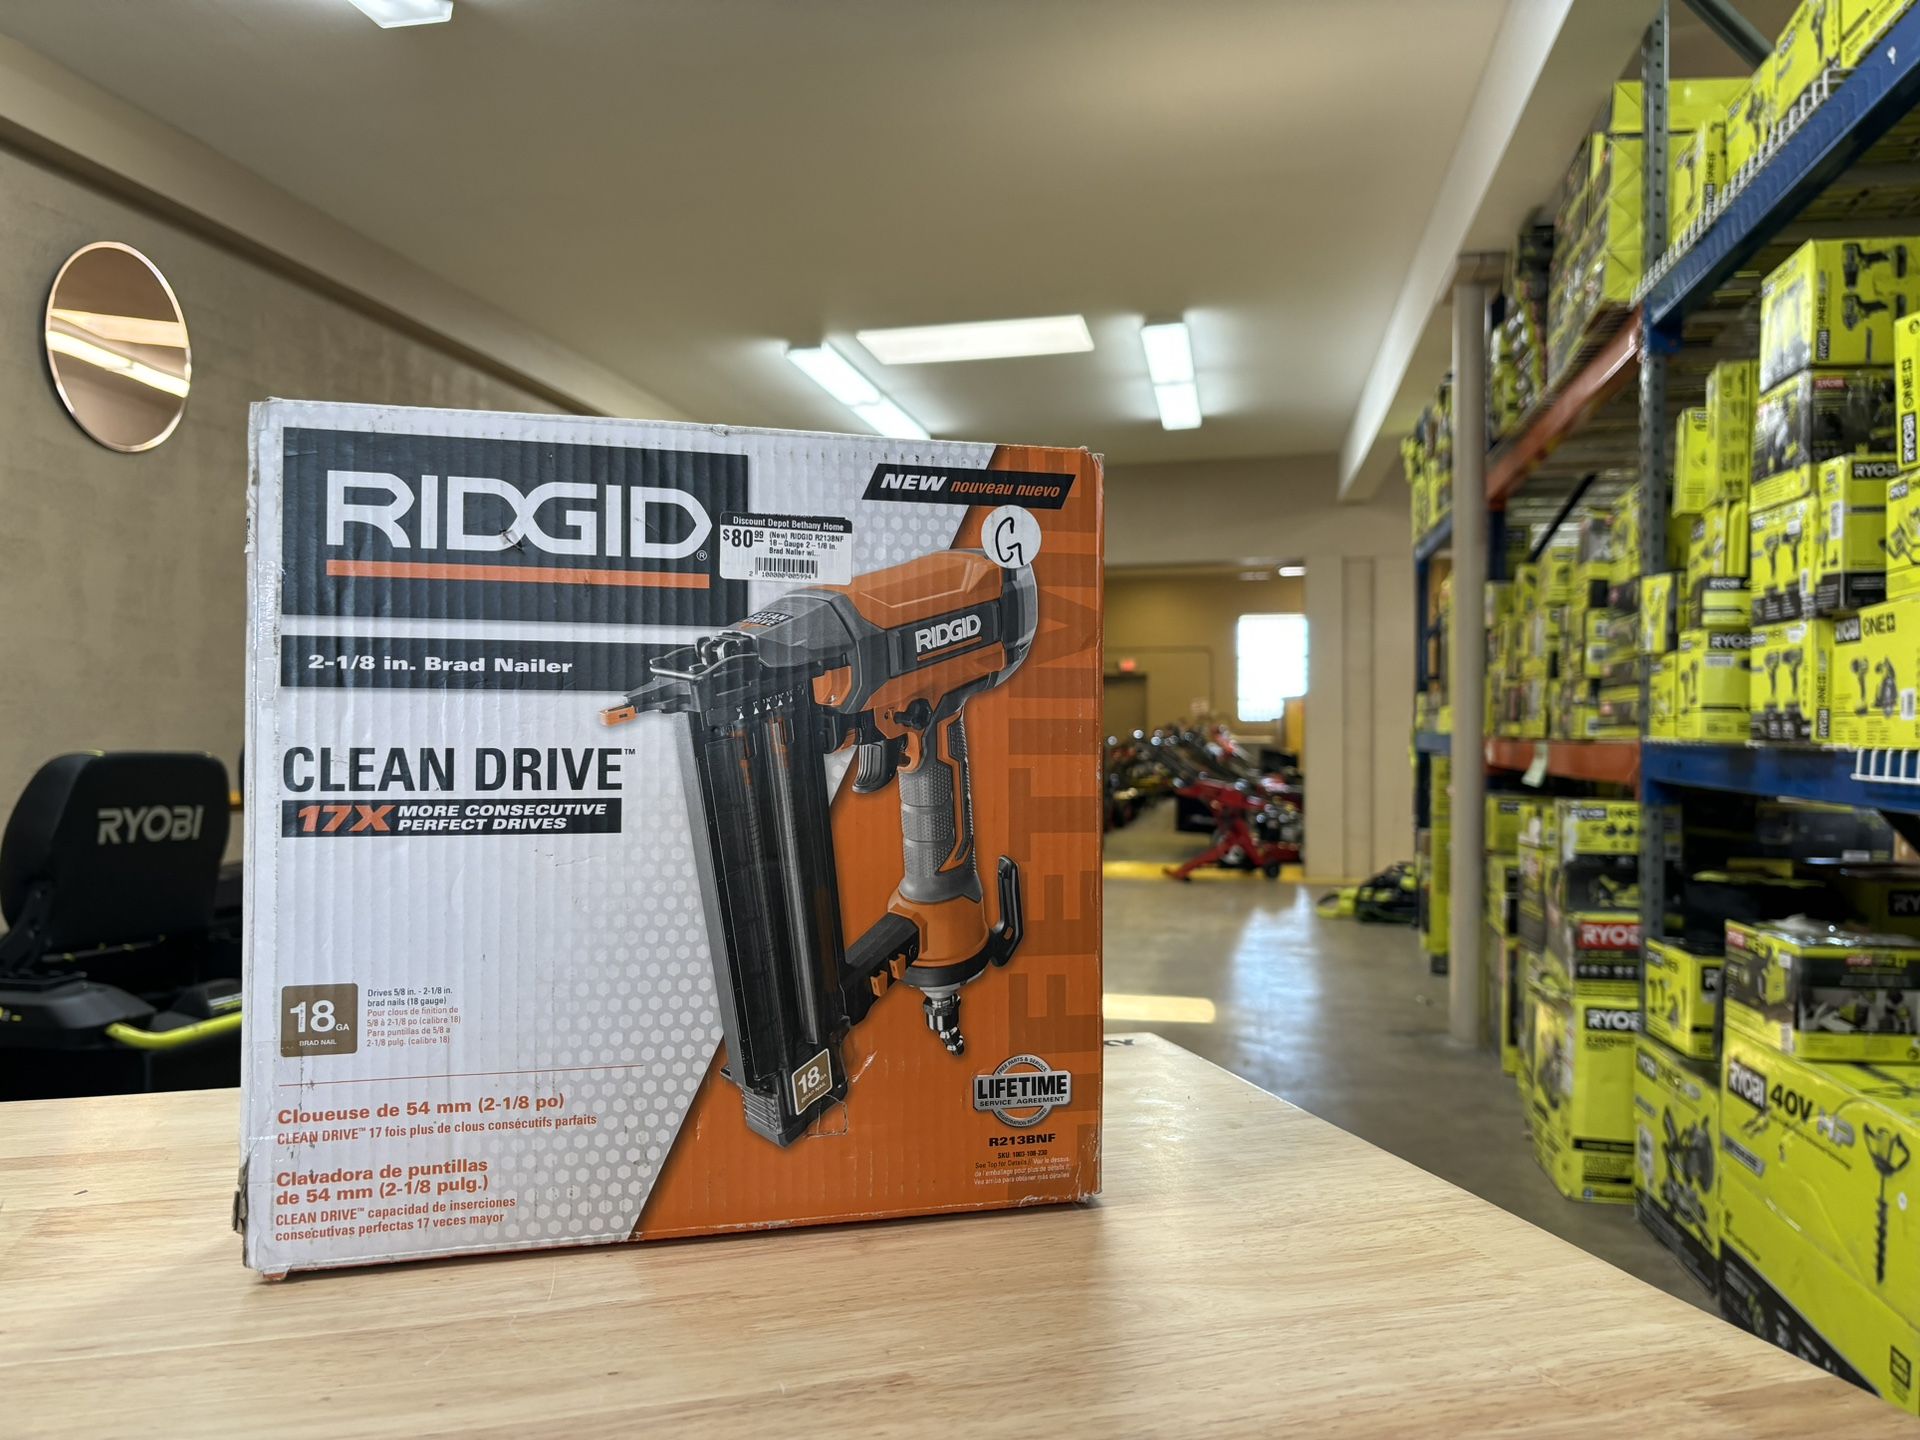 (New) Ridgid R213BNF 18-Gauge 2-1/8 In. Brad Nailer W/ CLEAN DRIVE  Technology Tool Bag & Sample Nails 